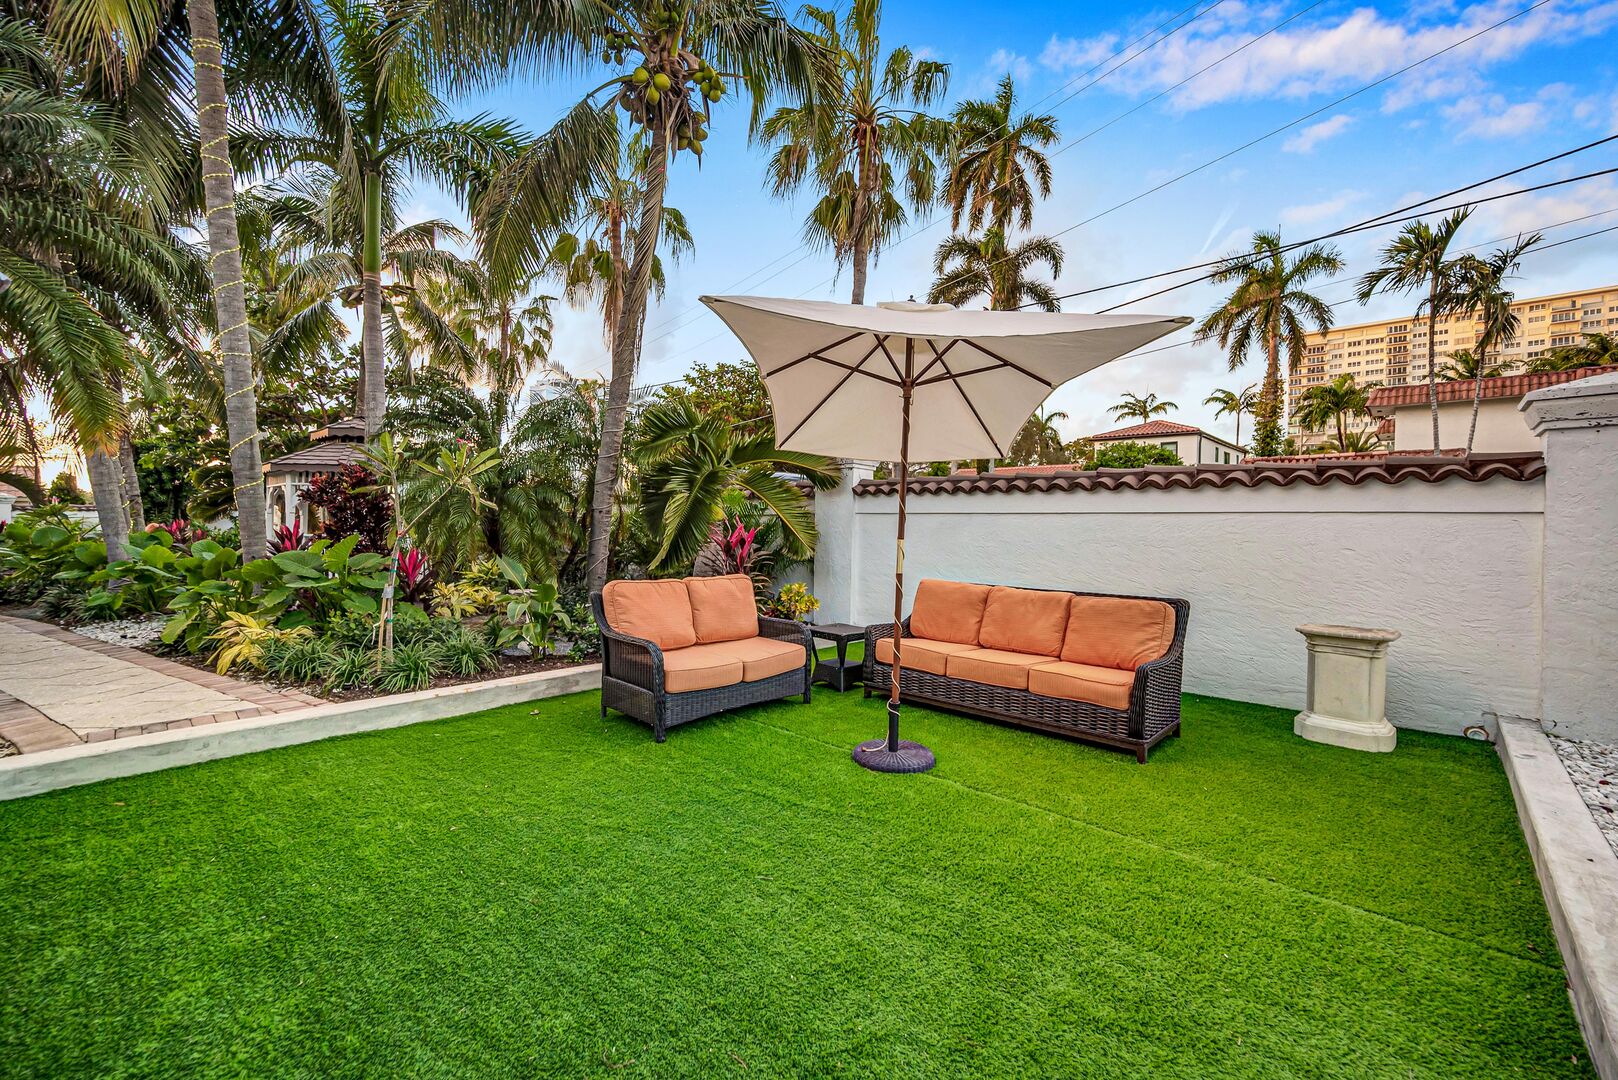 The lush outdoor patio accessible from bedrooms two and three.